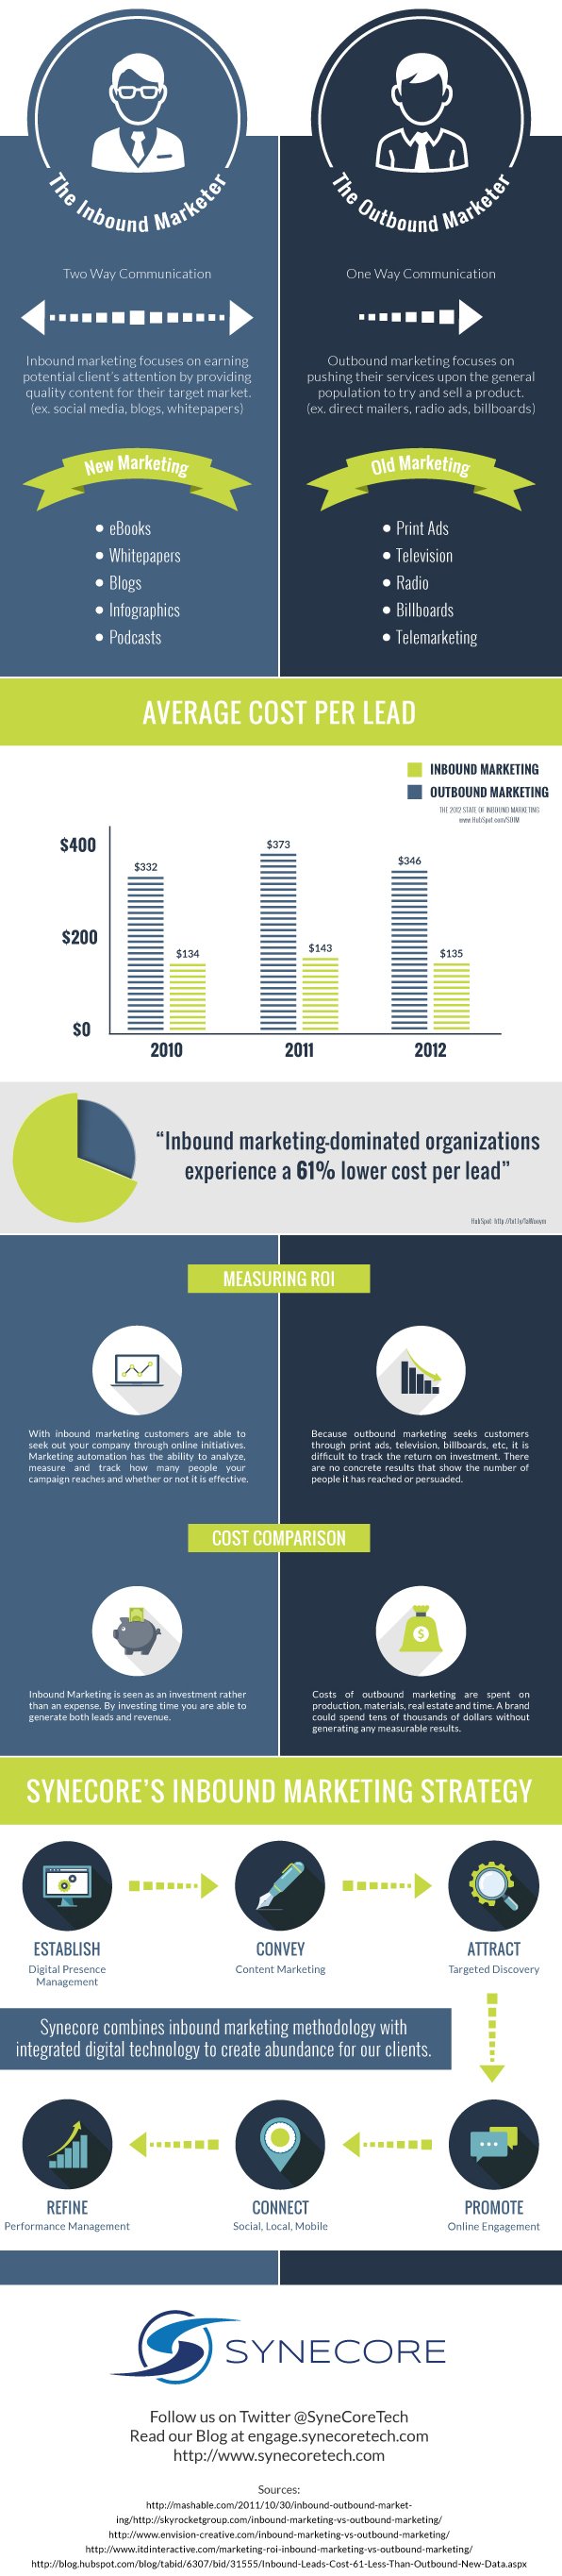 inbound-vs-outbound-marketer-small-infographic-1